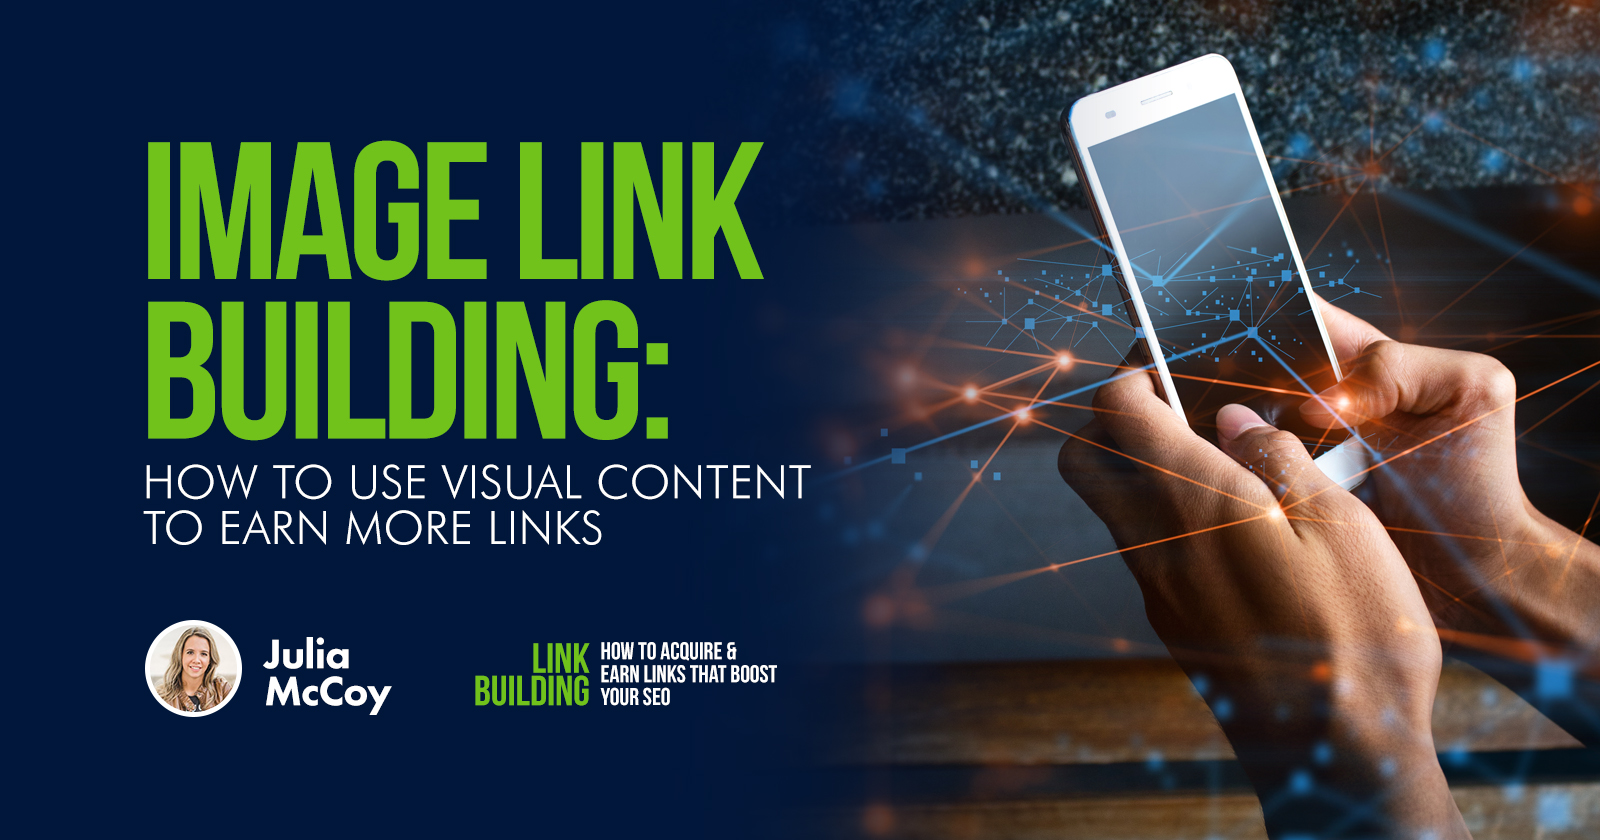 Image Link Building: How to Use Visual Content to Earn More Links via @JuliaEMcCoy